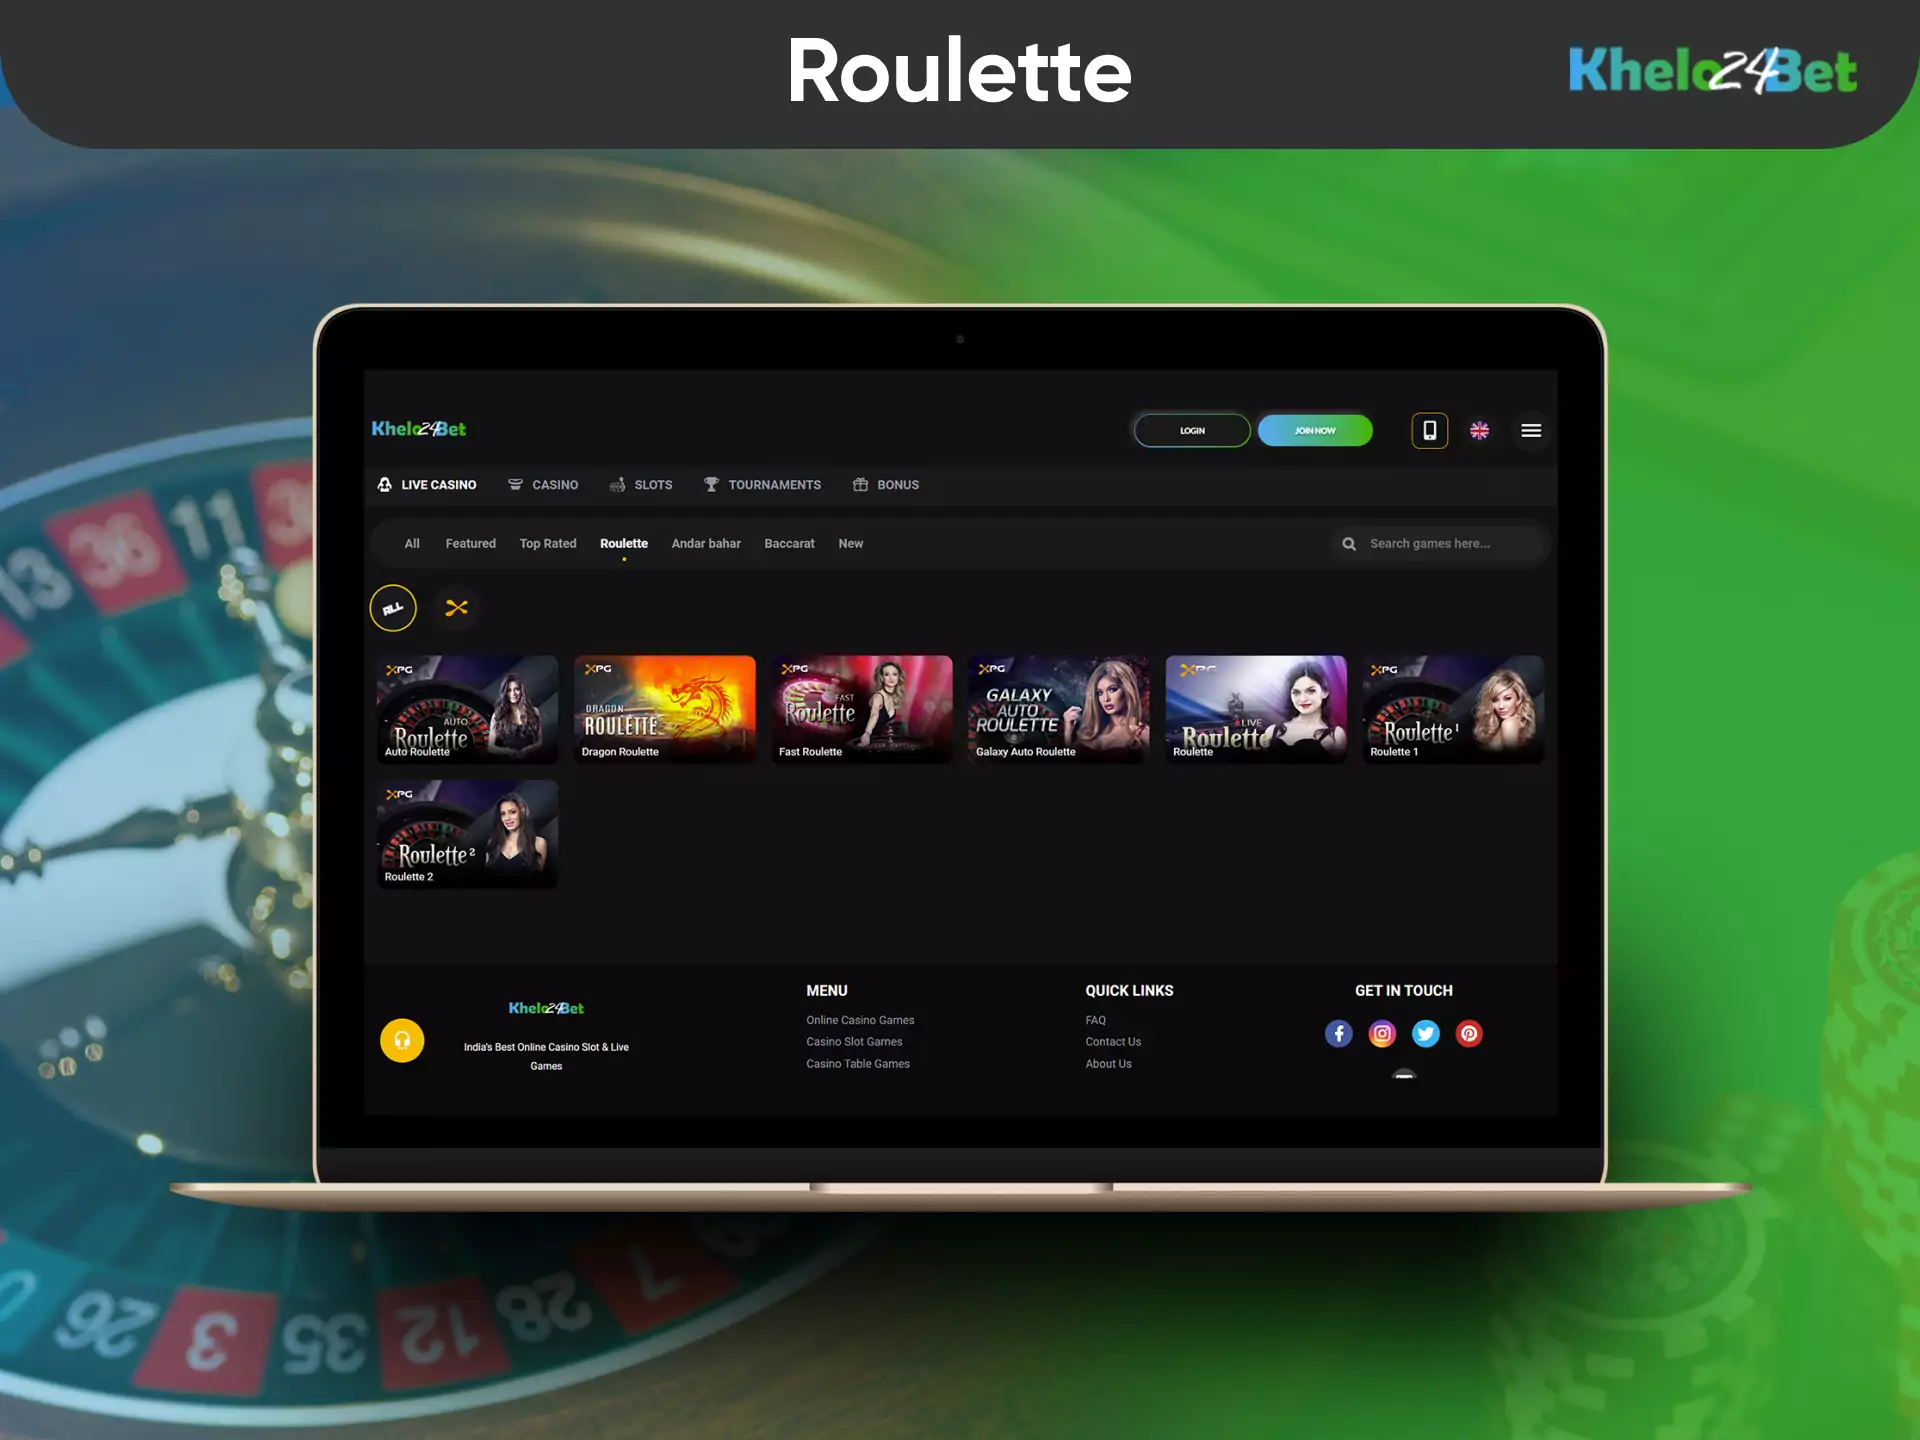 In the Khelo24bet Casino, there are lots of types of roulette available for playing.